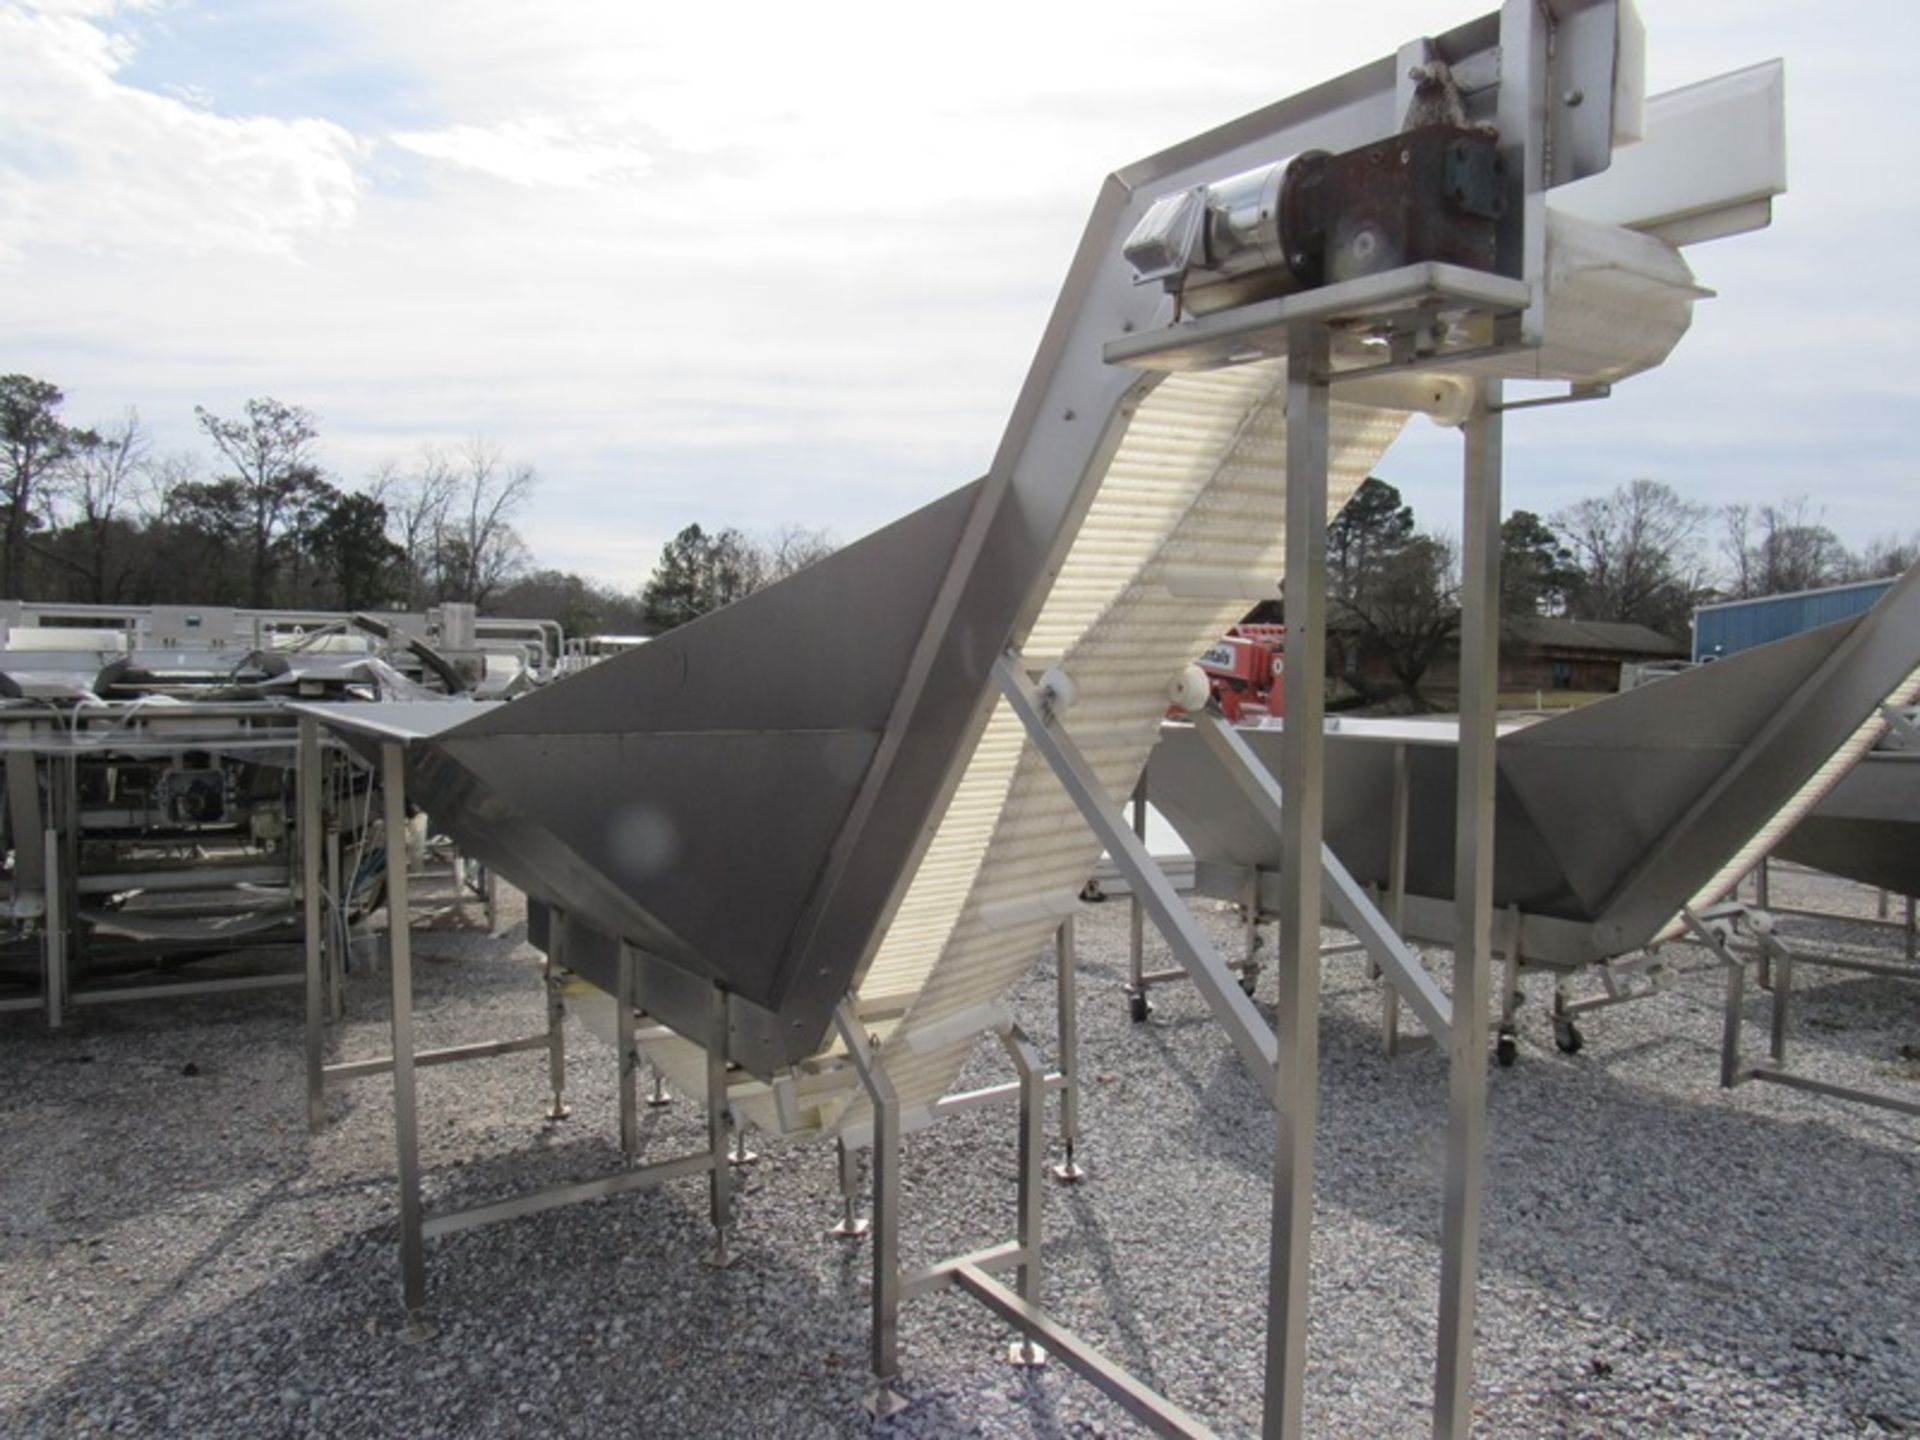 Stainless Steel Trough with incline conveyor, 6' W X 15' L X 4' D, 12" W X 13' L flighted belt, 2" H - Image 4 of 4